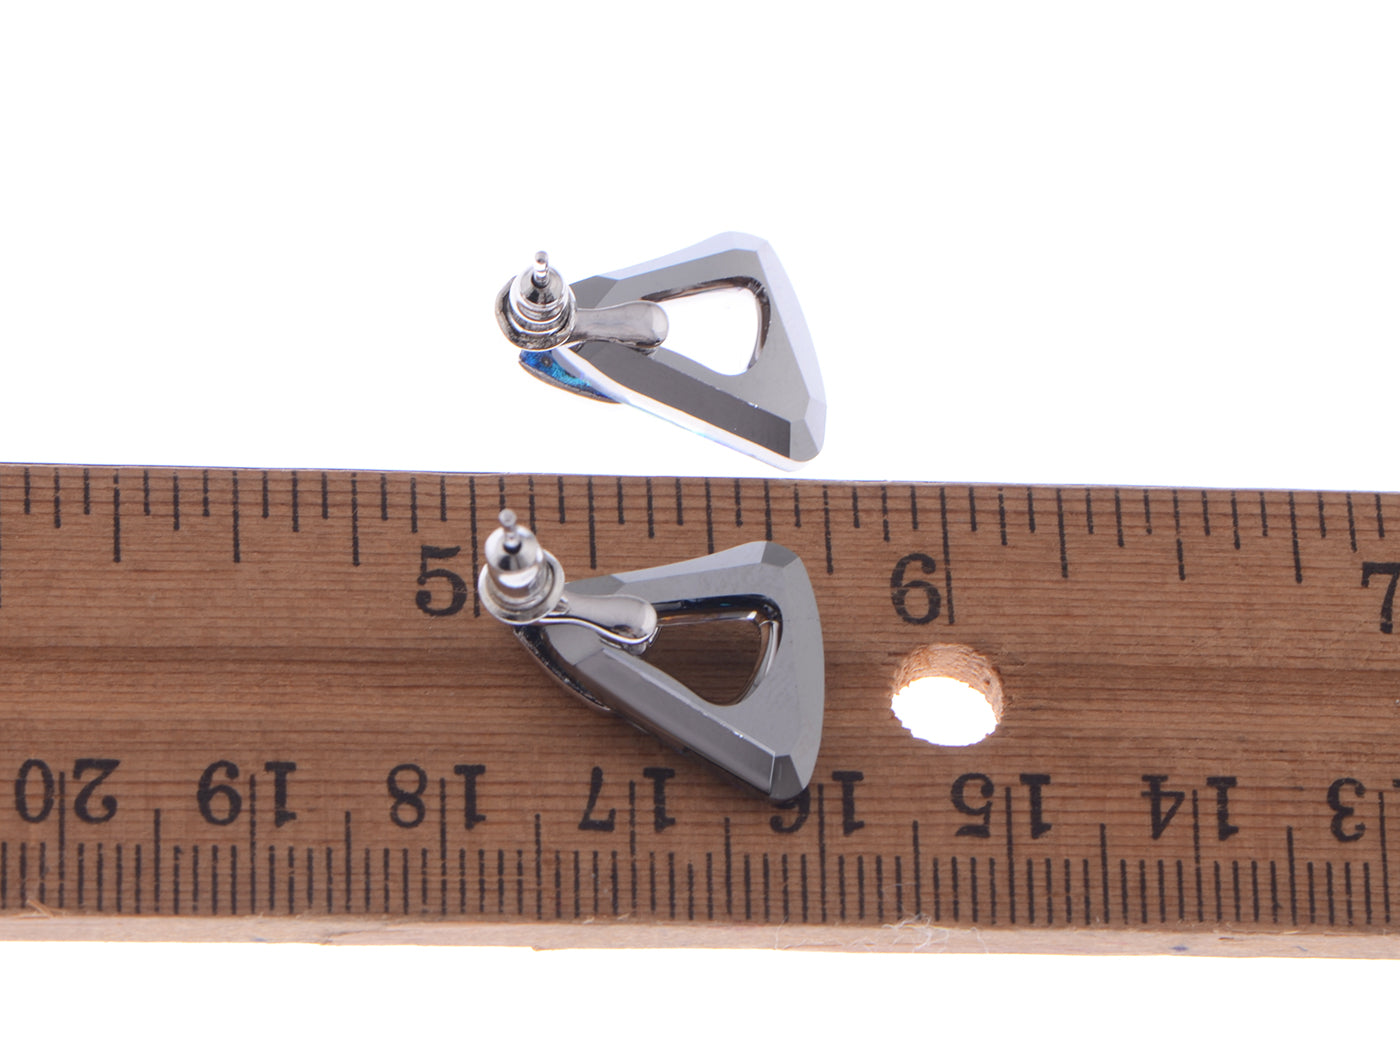 Swarovski Crystal Element Silver Teal Blue Colored Abstract Triangle Art Stud Earrings